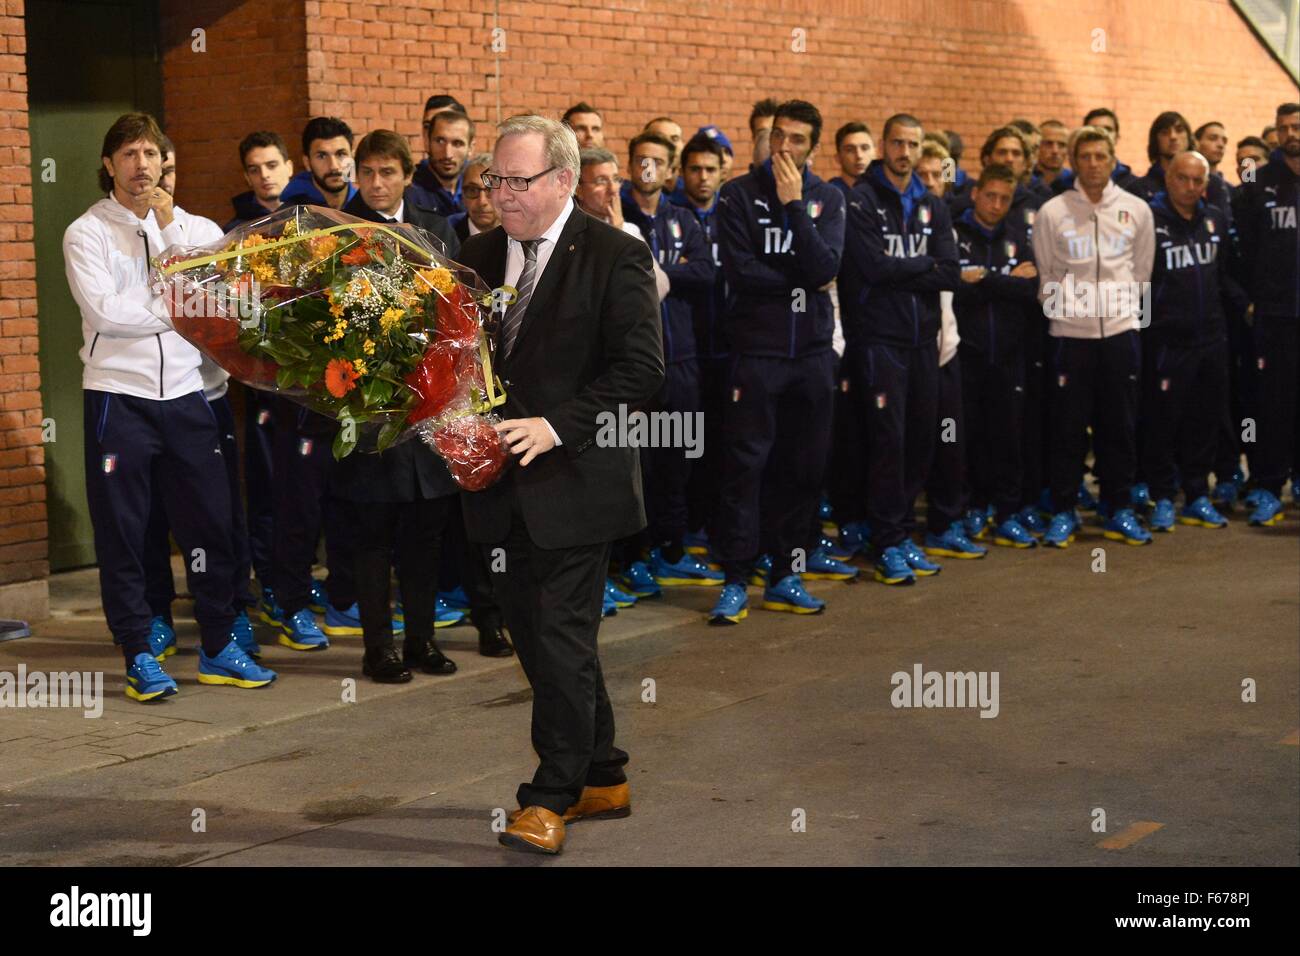 12.11.2015. King Baudouin Stadium (Formerly Heysel Stadium) Brussels, Belgium. The Juventus team visit the location where 39 fans from Liverpool and Juventus were killed during riots at the European cup final in May 1985 (30 years ago).  De Keersmaecker Francois President of Royal Belgian Football Federation Stock Photo